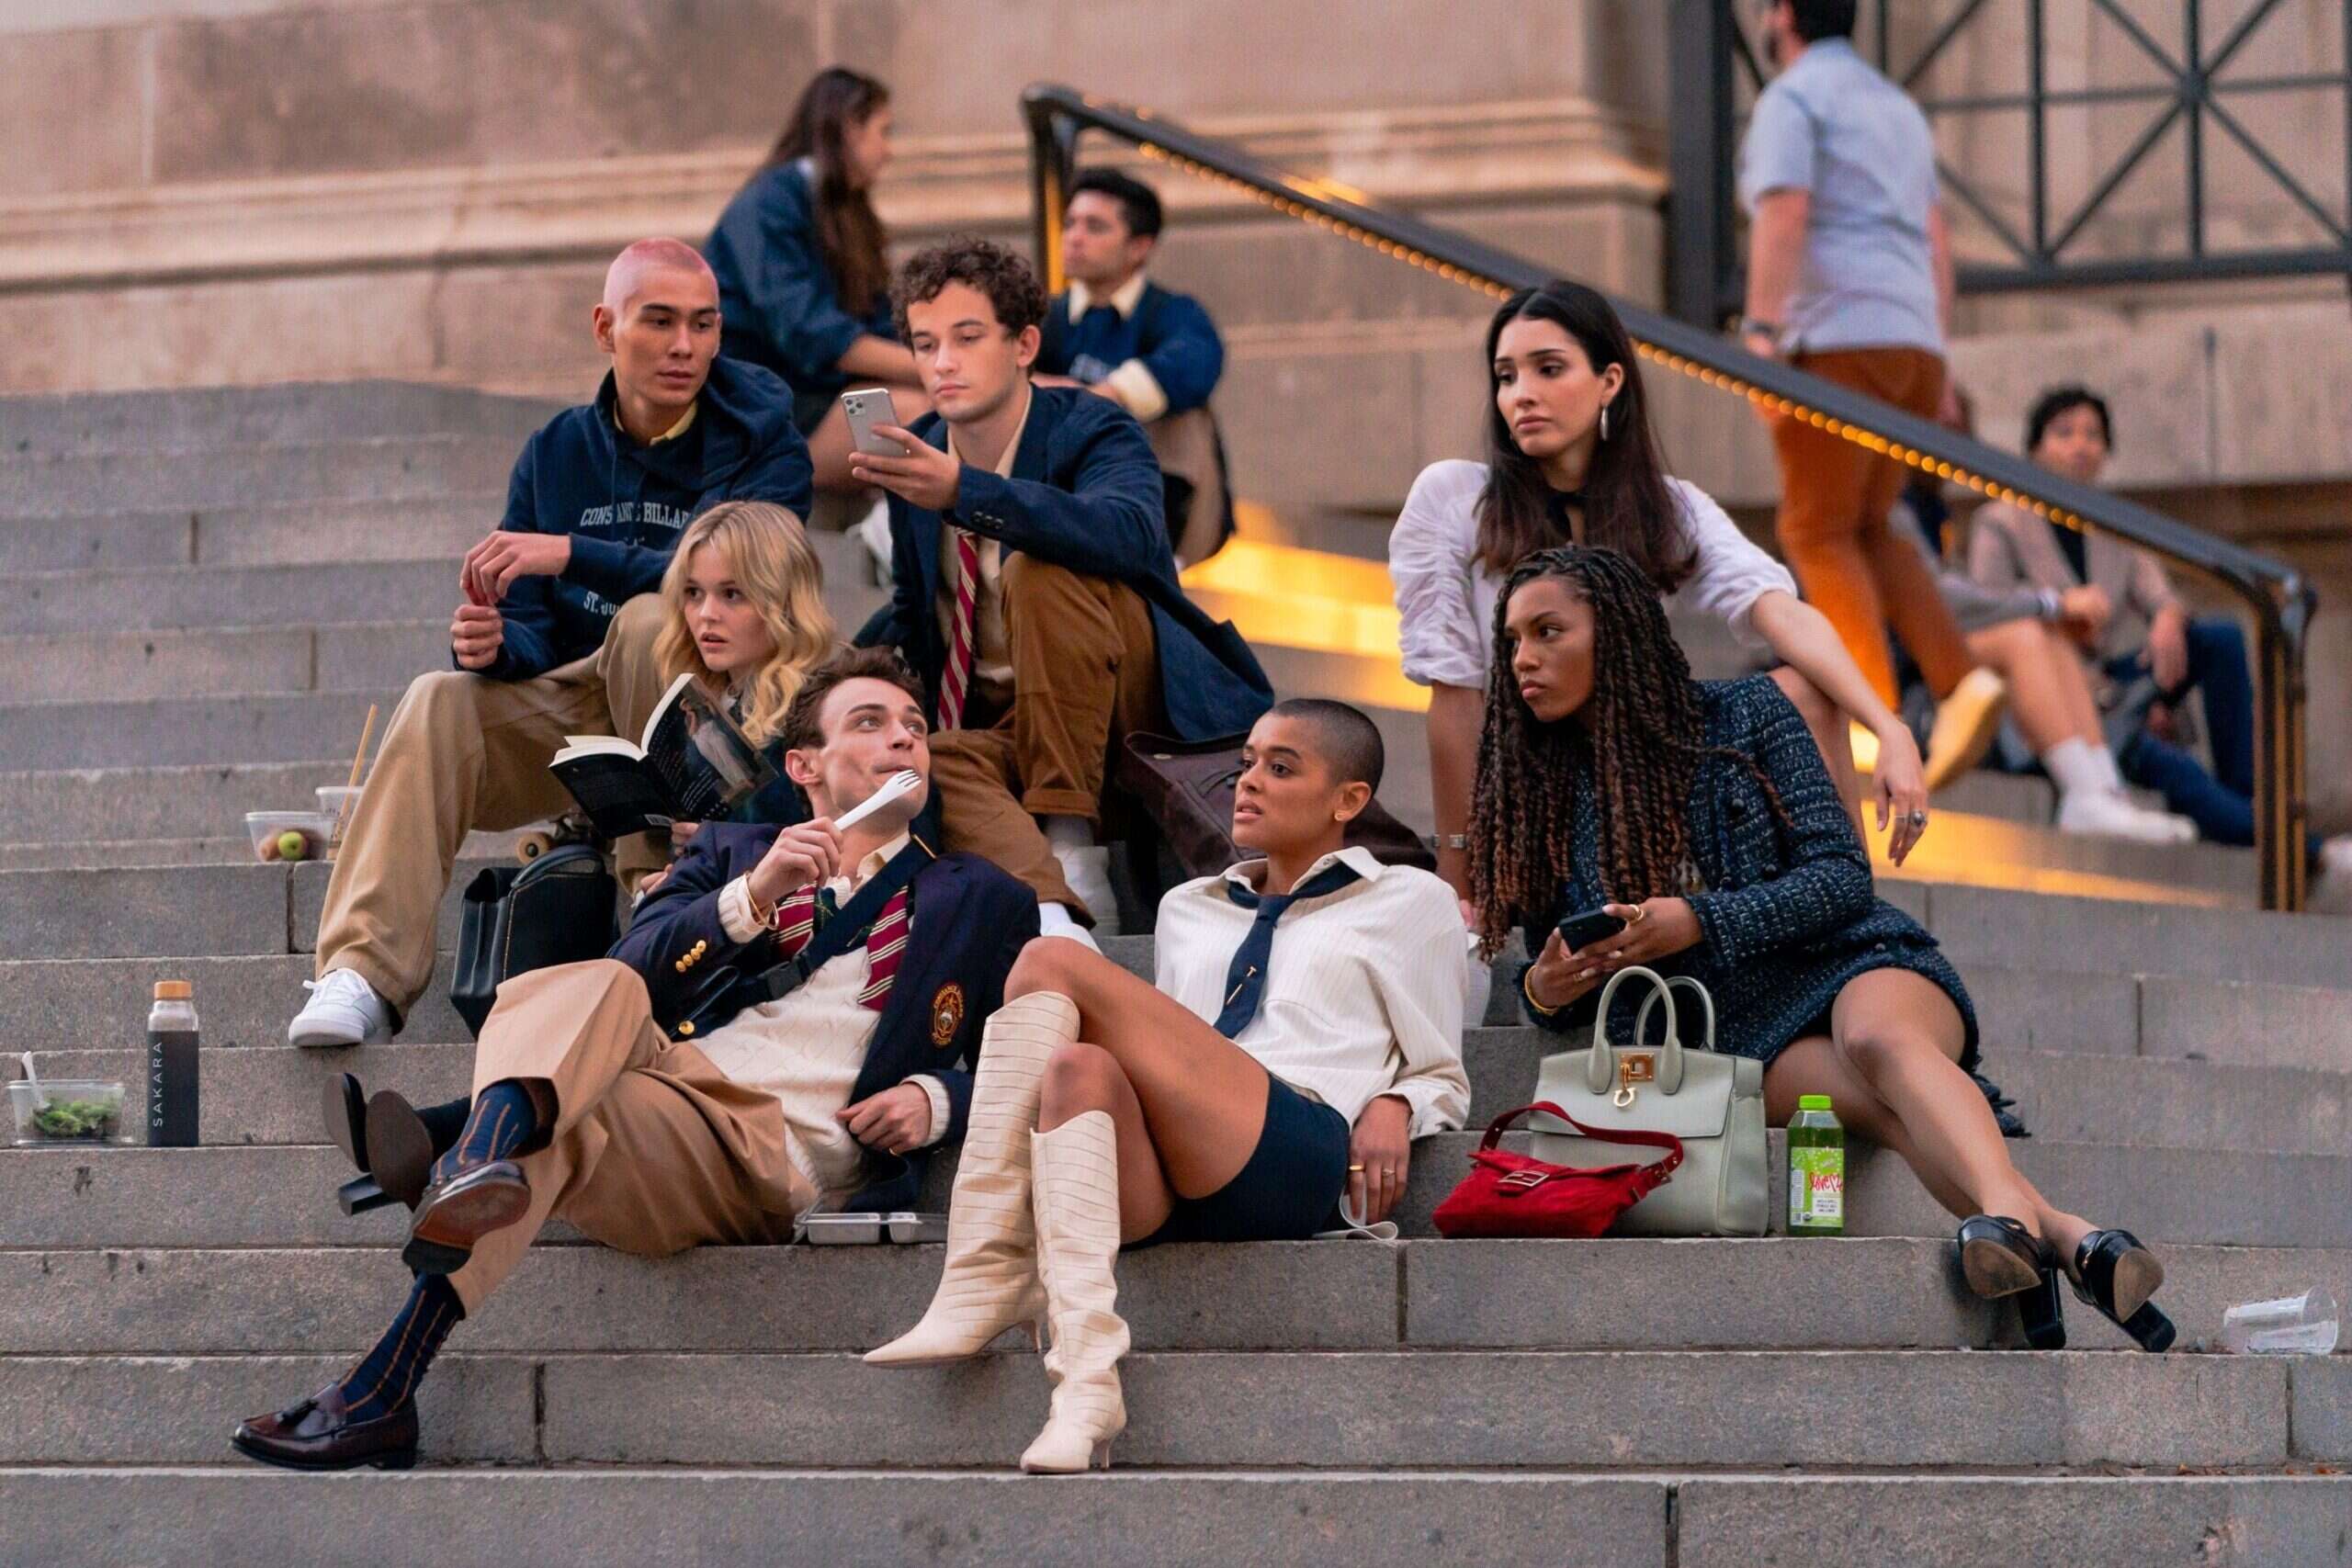 Does the new Gossip Girl capture gossip in the social media age?